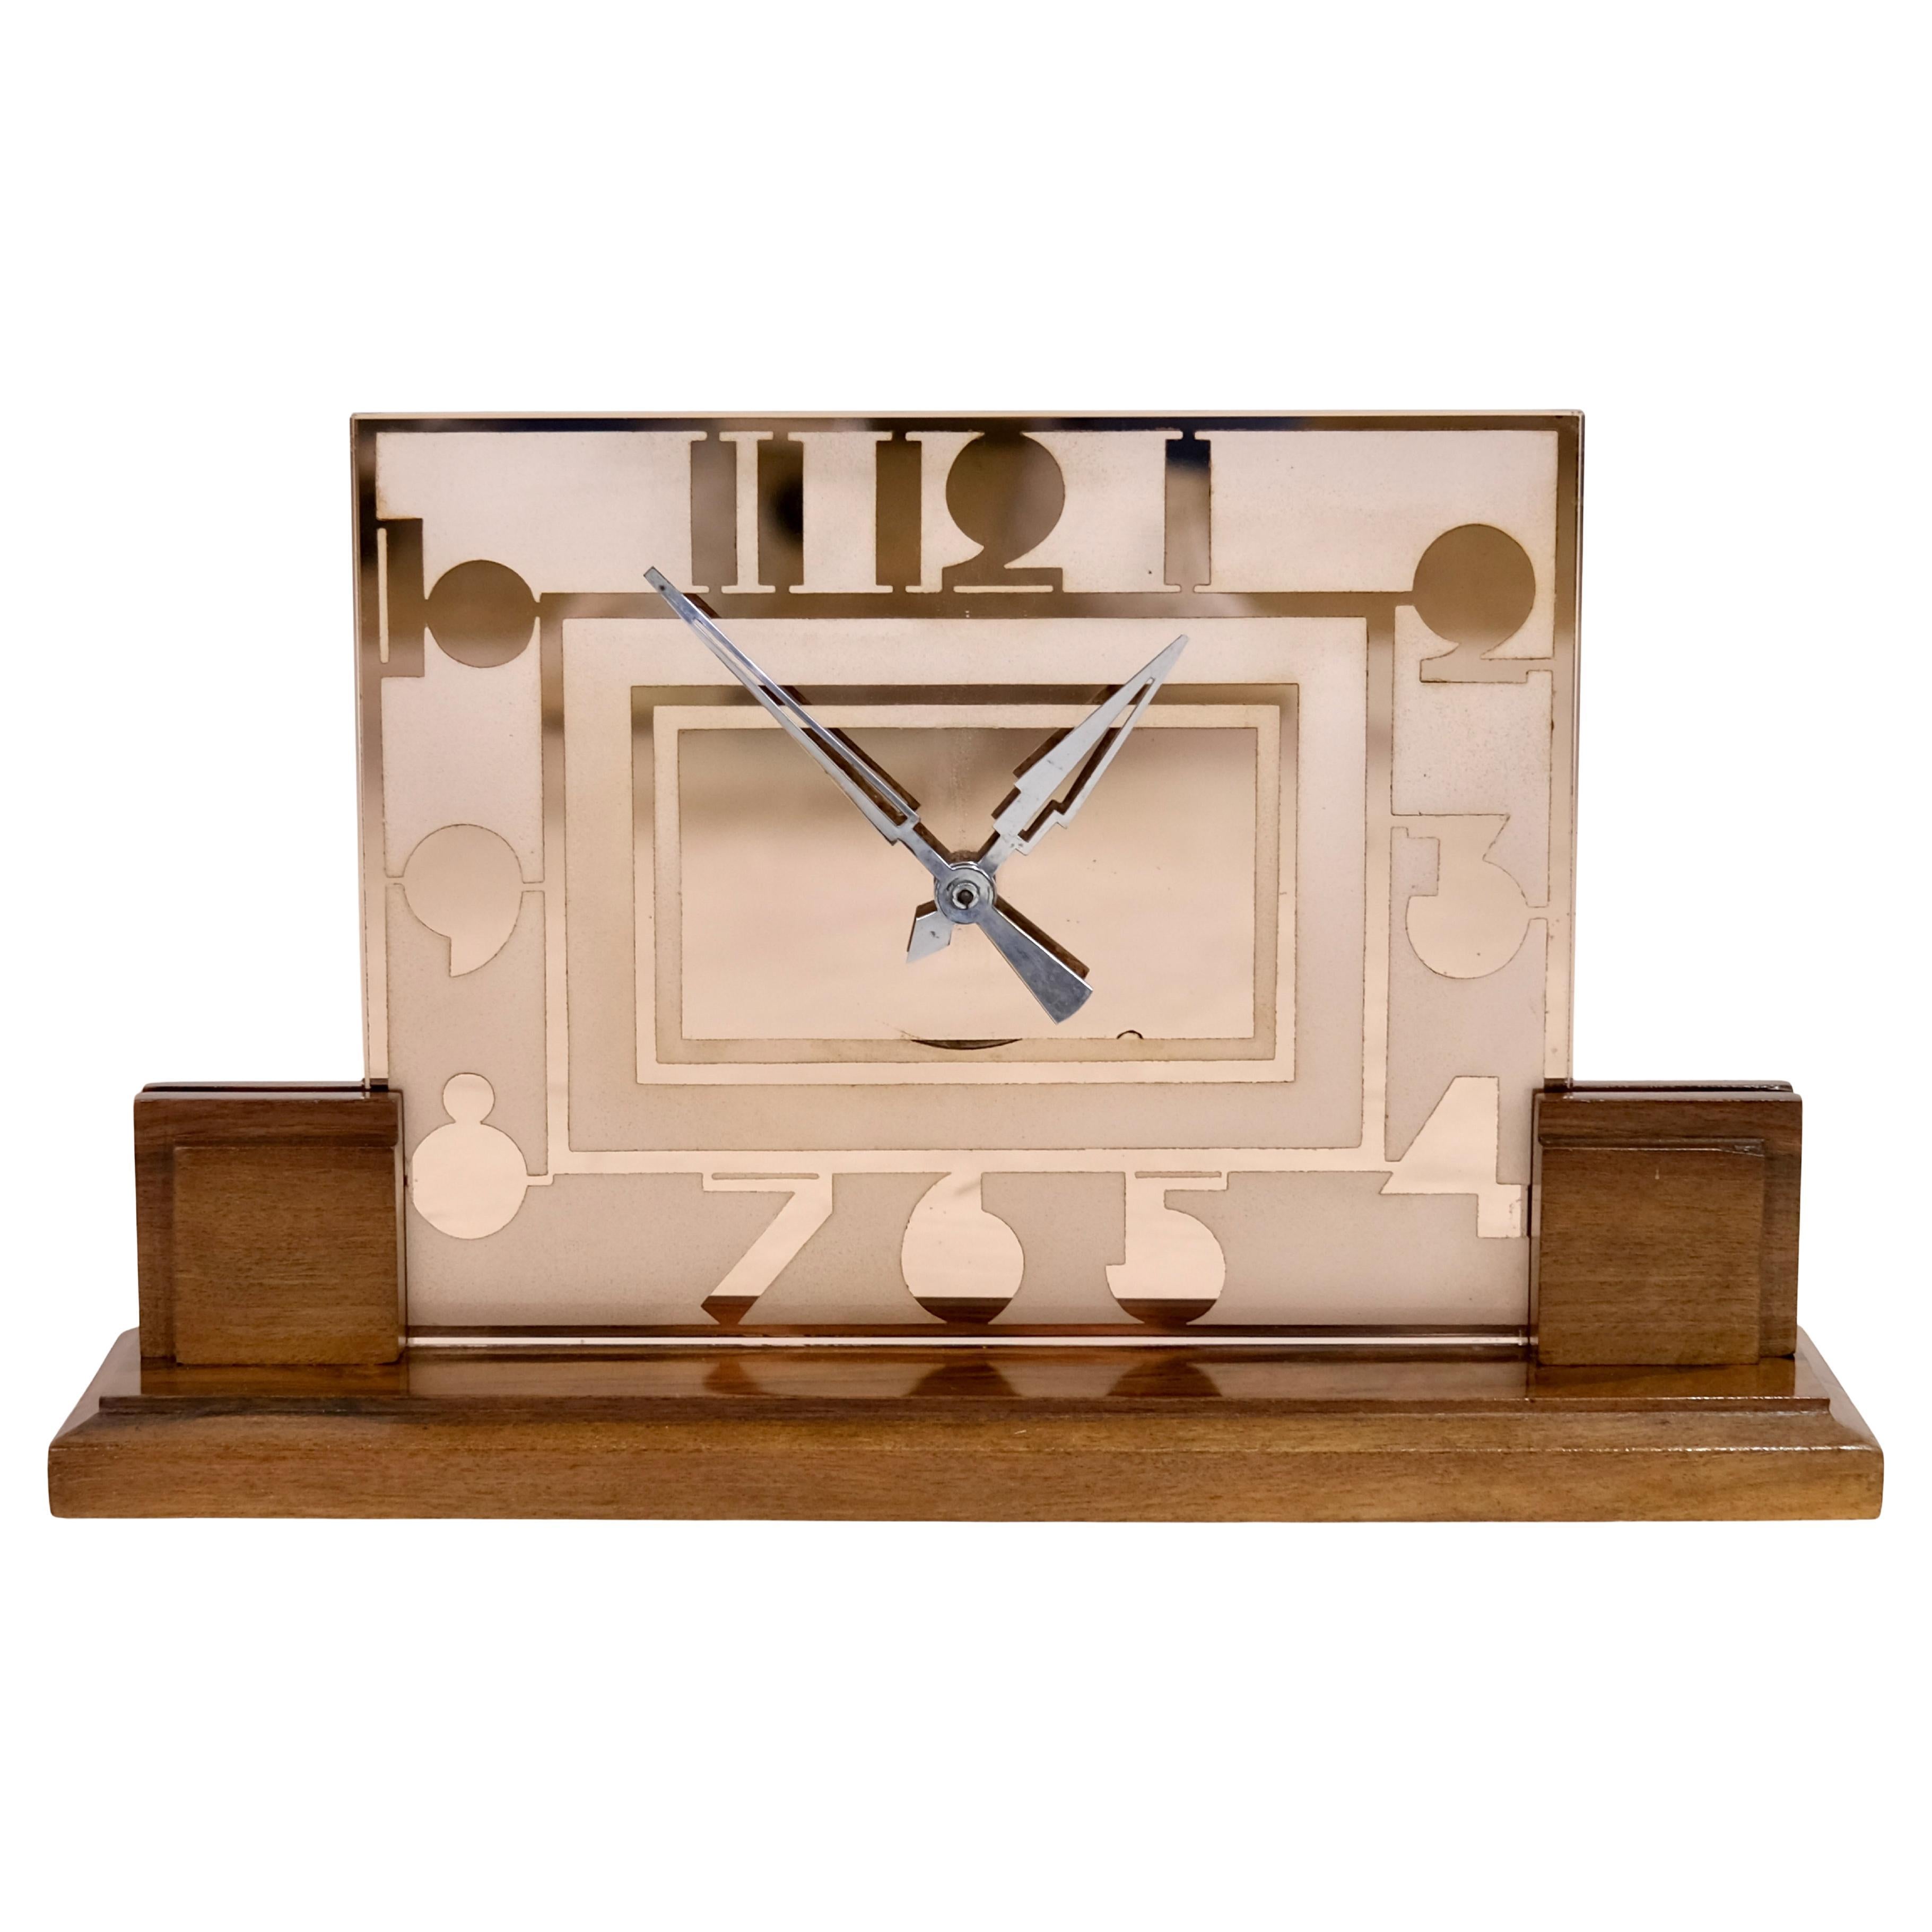 1930s Art Deco Table Clock With Rosaline Glass And Art Deco Typical Numerals For Sale